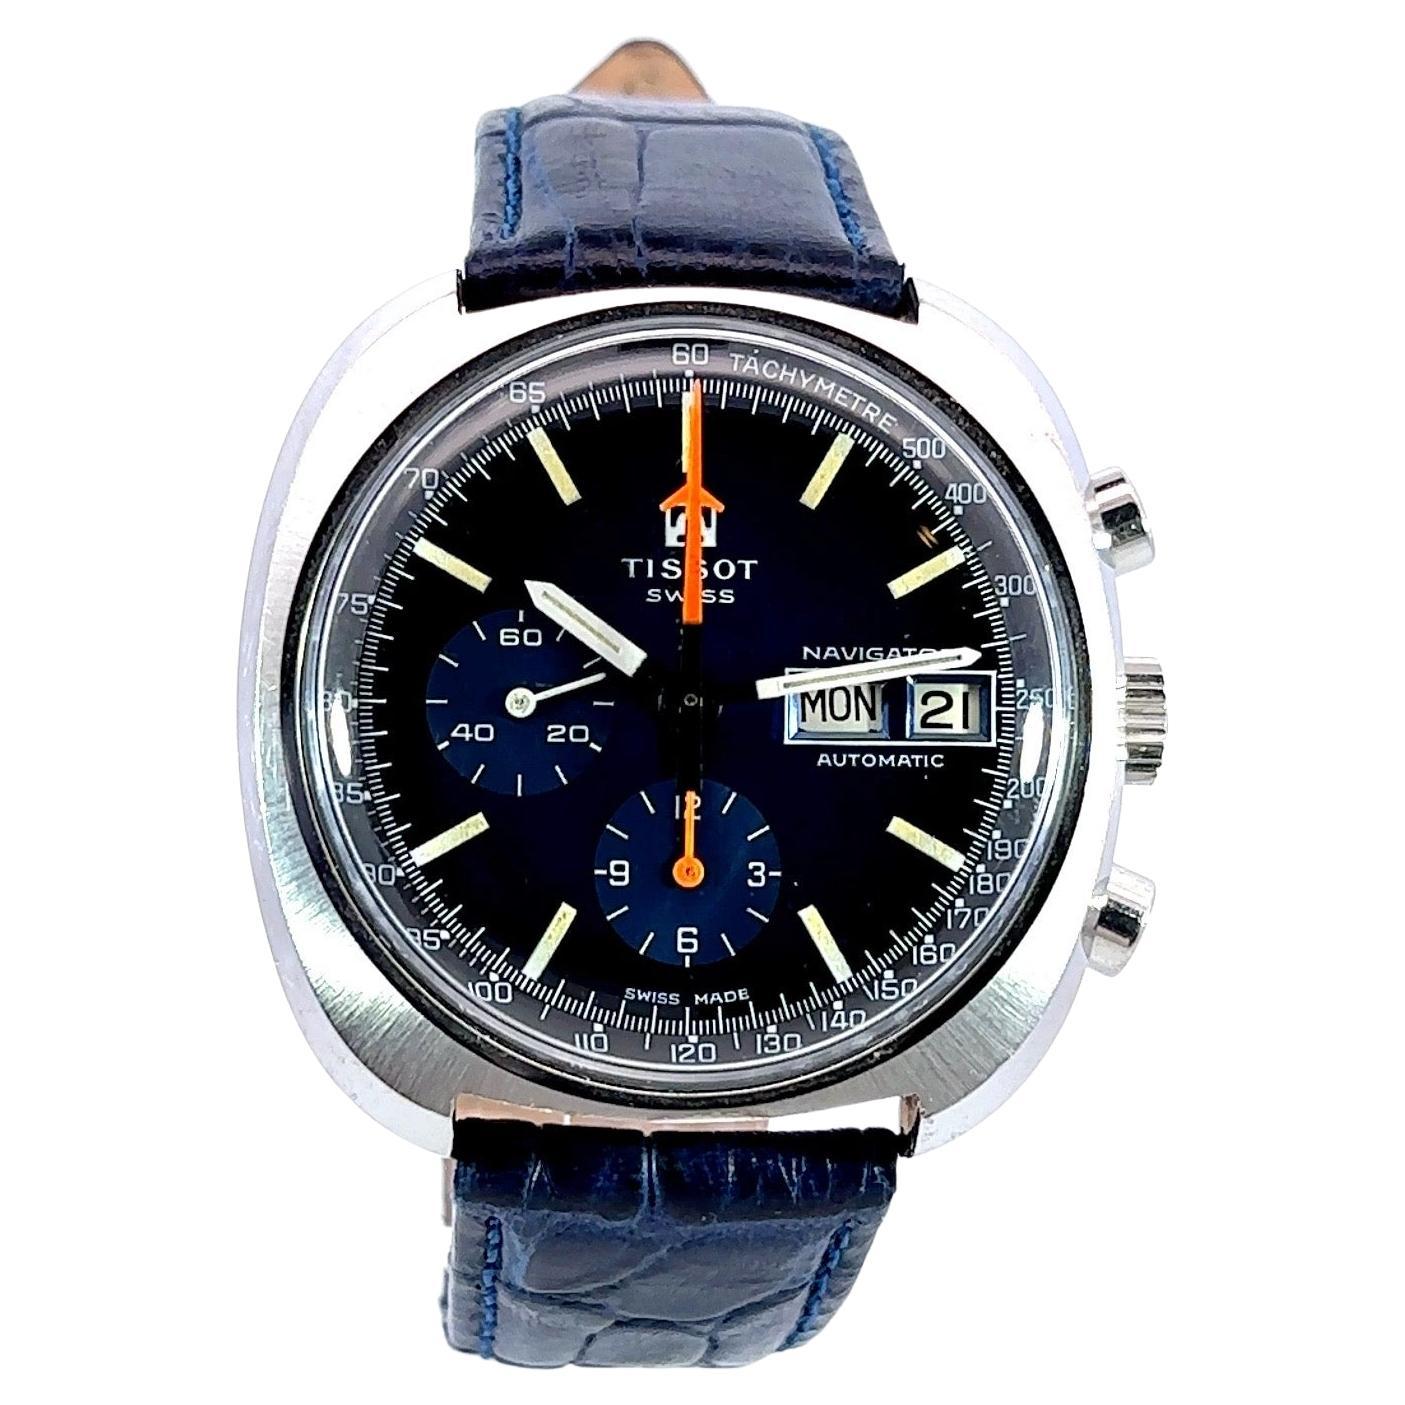 Tissot Navigator Automatic Chronograph Steel Tachymeter Blue Dial

Super Condition, Collectors Watch

Movement: Automatic, Caliber Lemania 1341

Case: Steel case, Diameter 39.7mm x 36.7mm Thickness 15.2mm

Dial: Blue dial, day and date window at 3